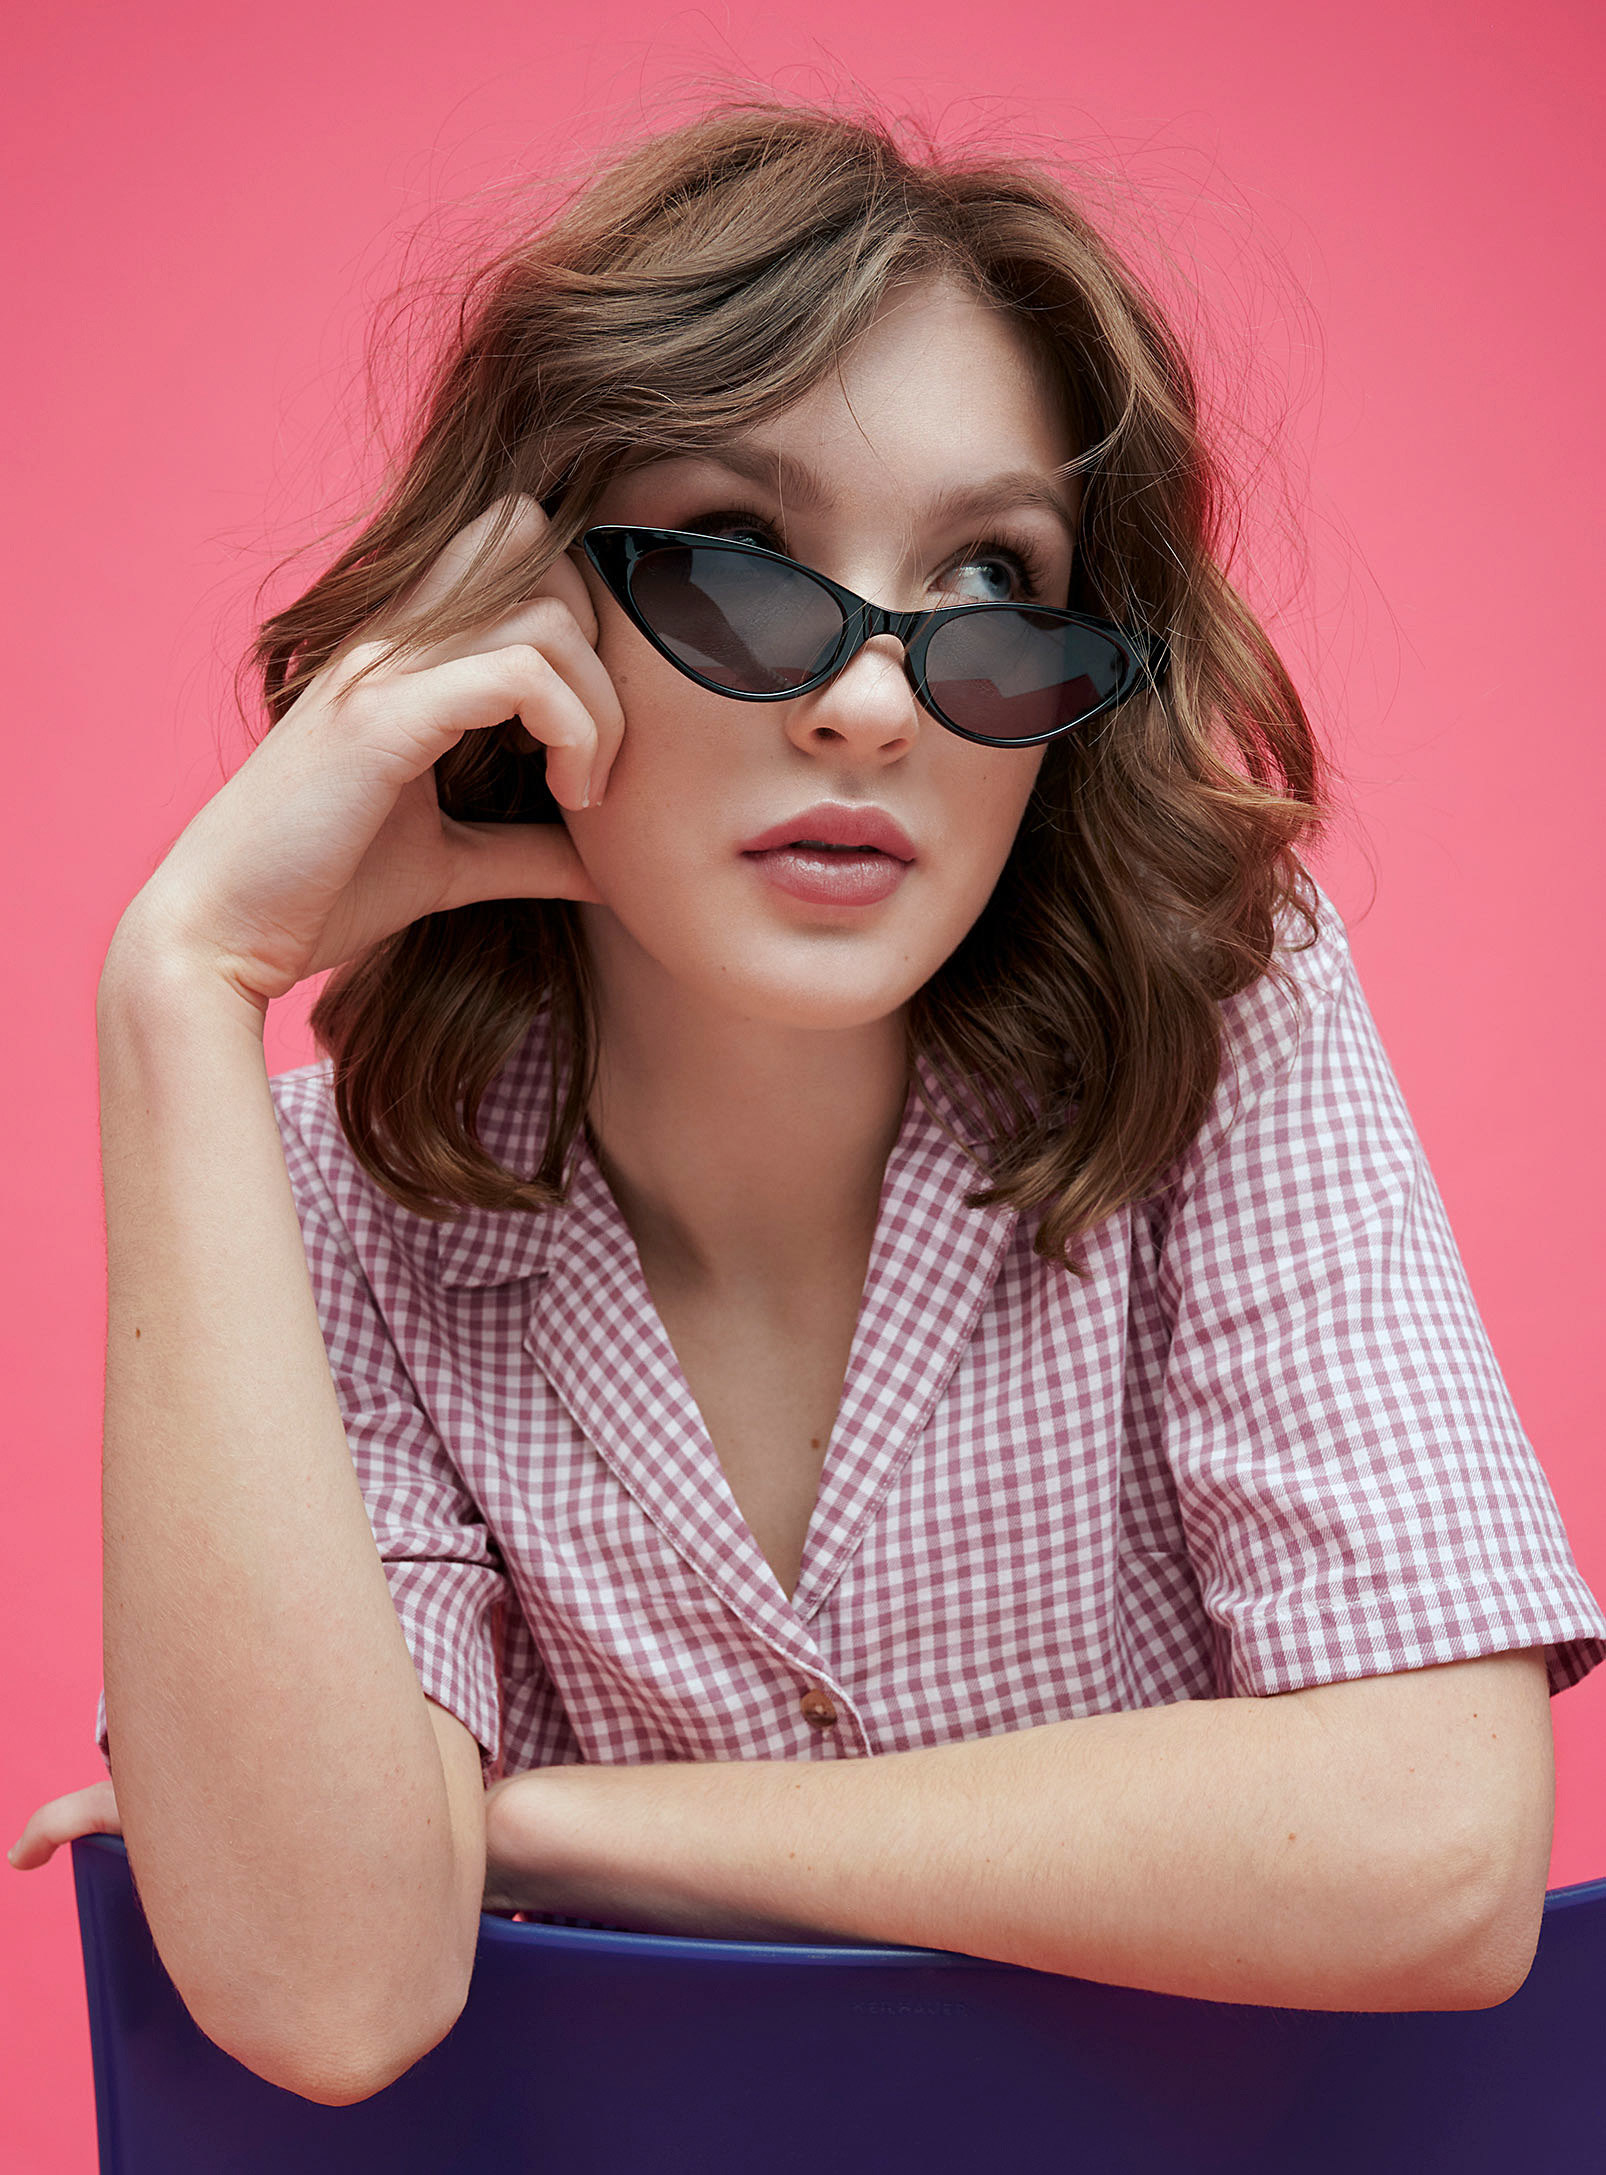 A person wearing tiny cat-eye sunglasses